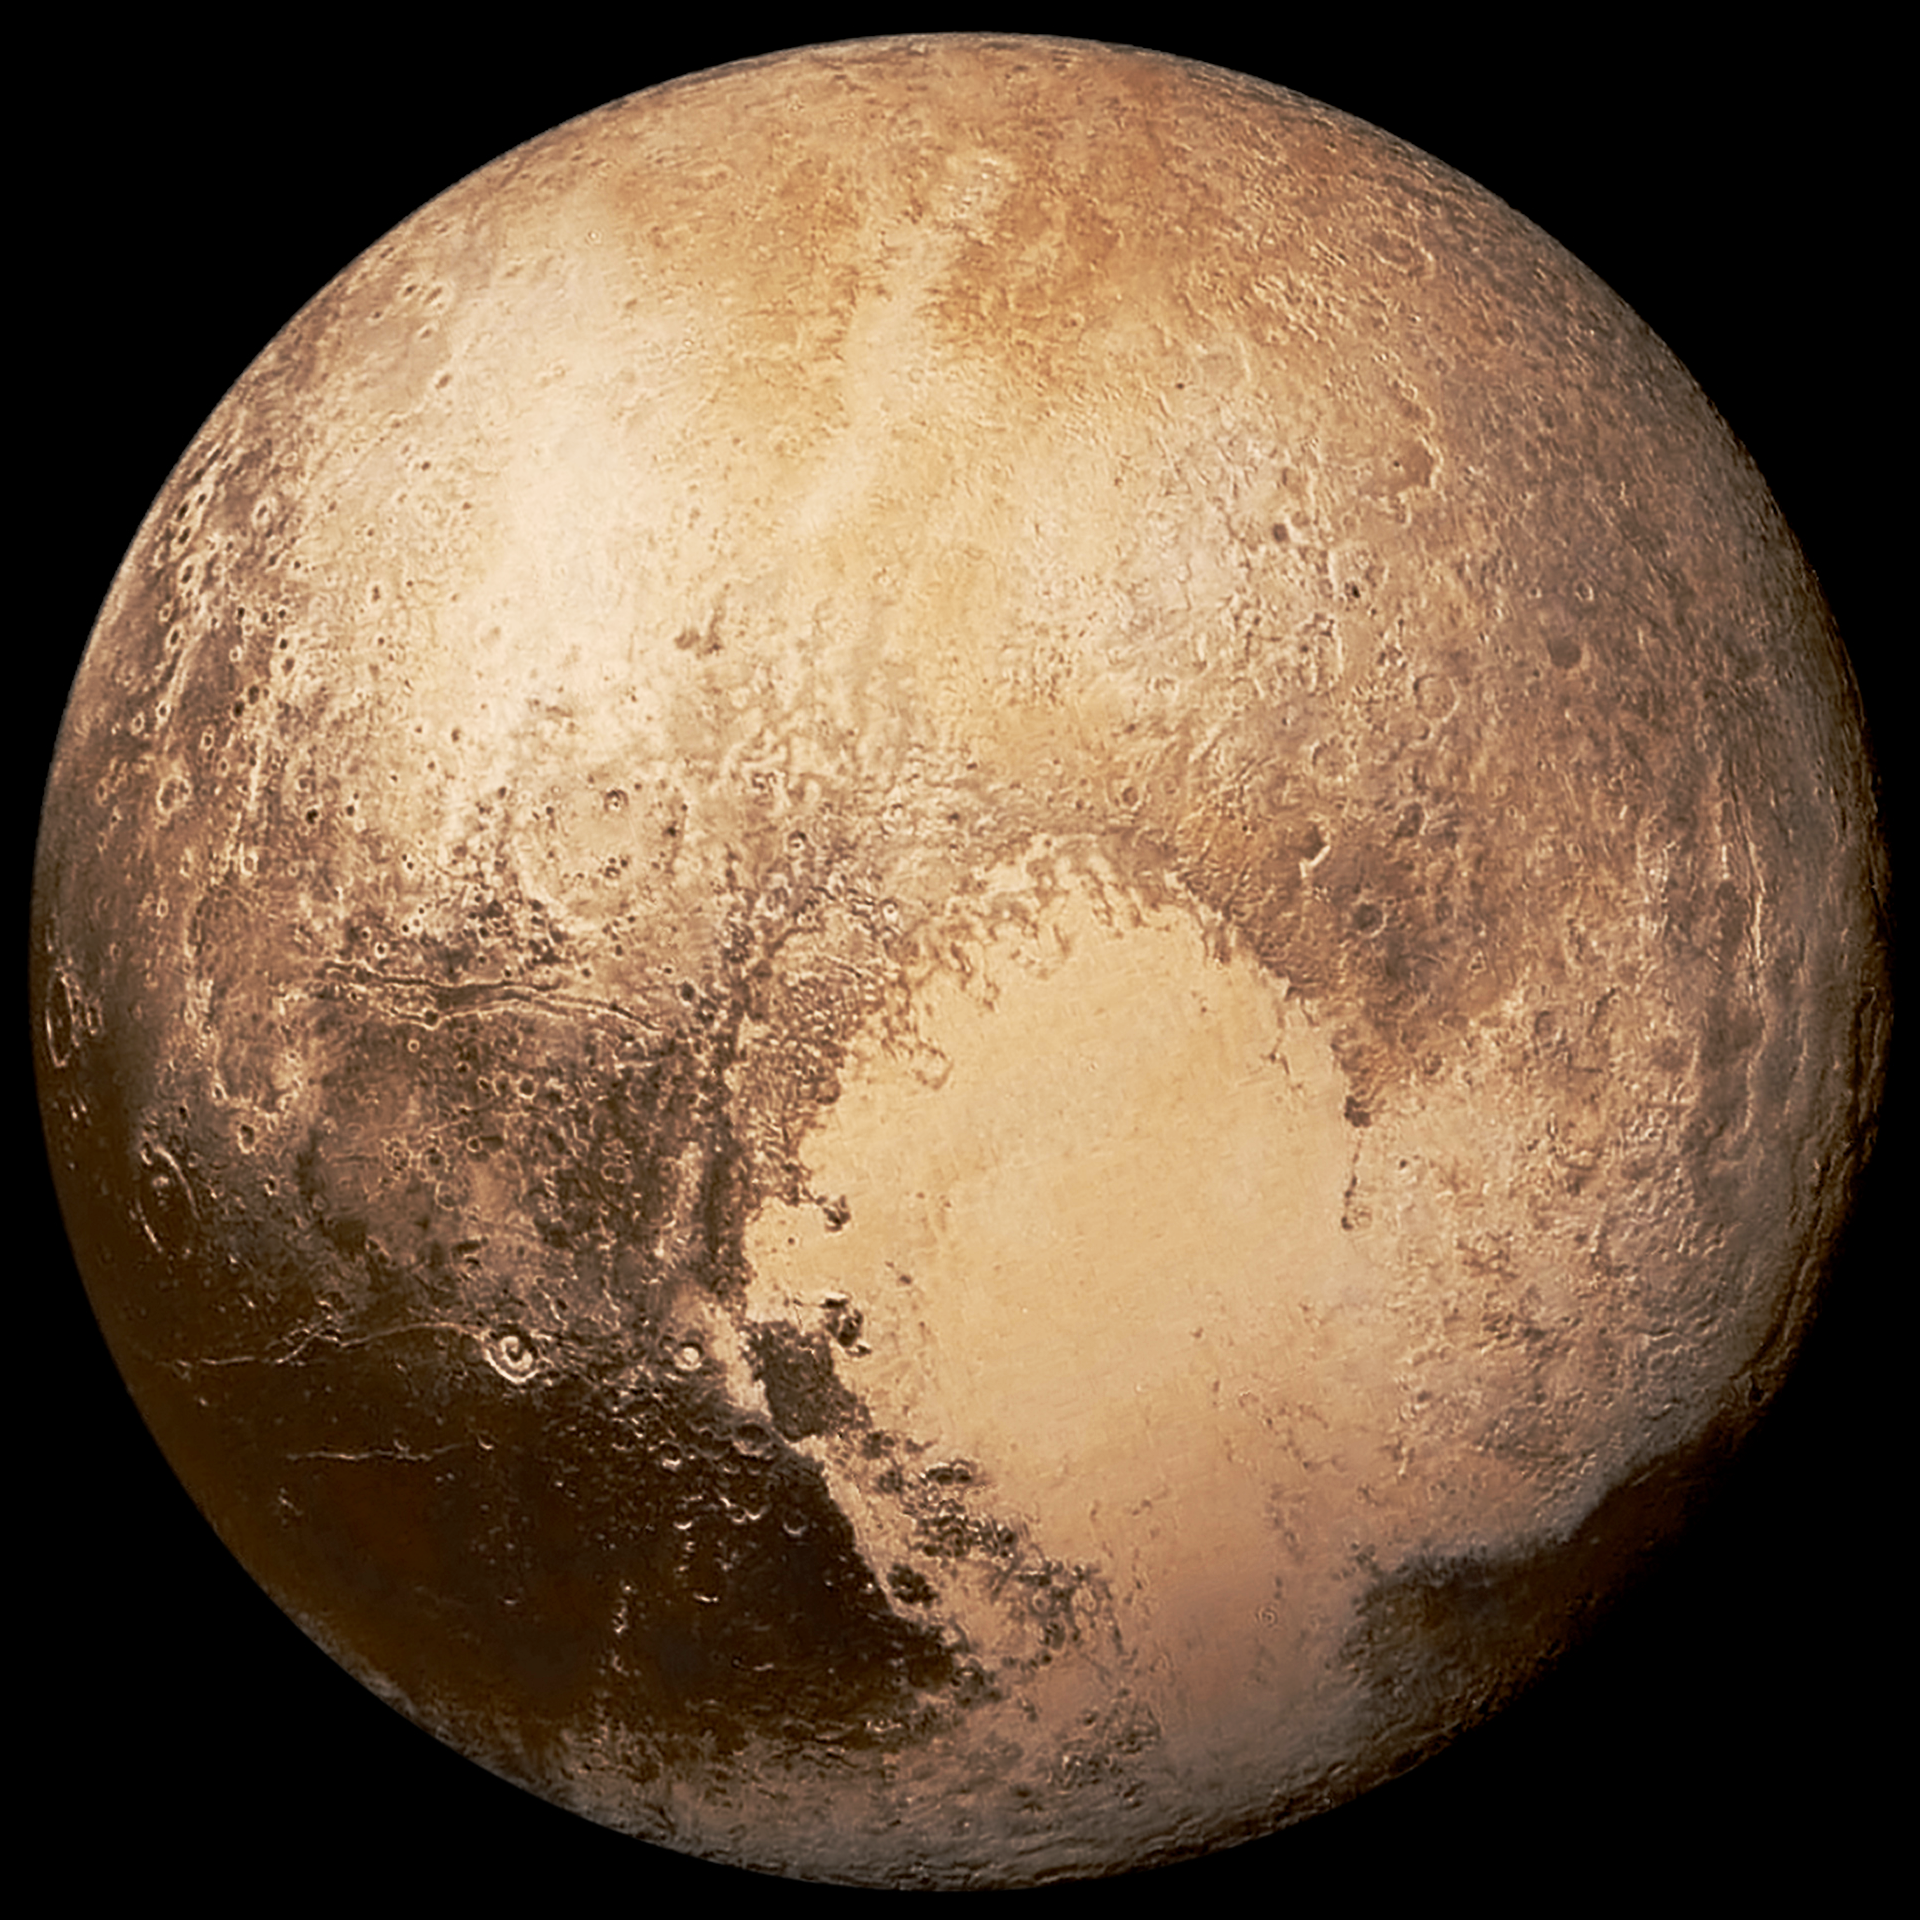 The highest resolution image of Pluto to date (July 14, 2015)